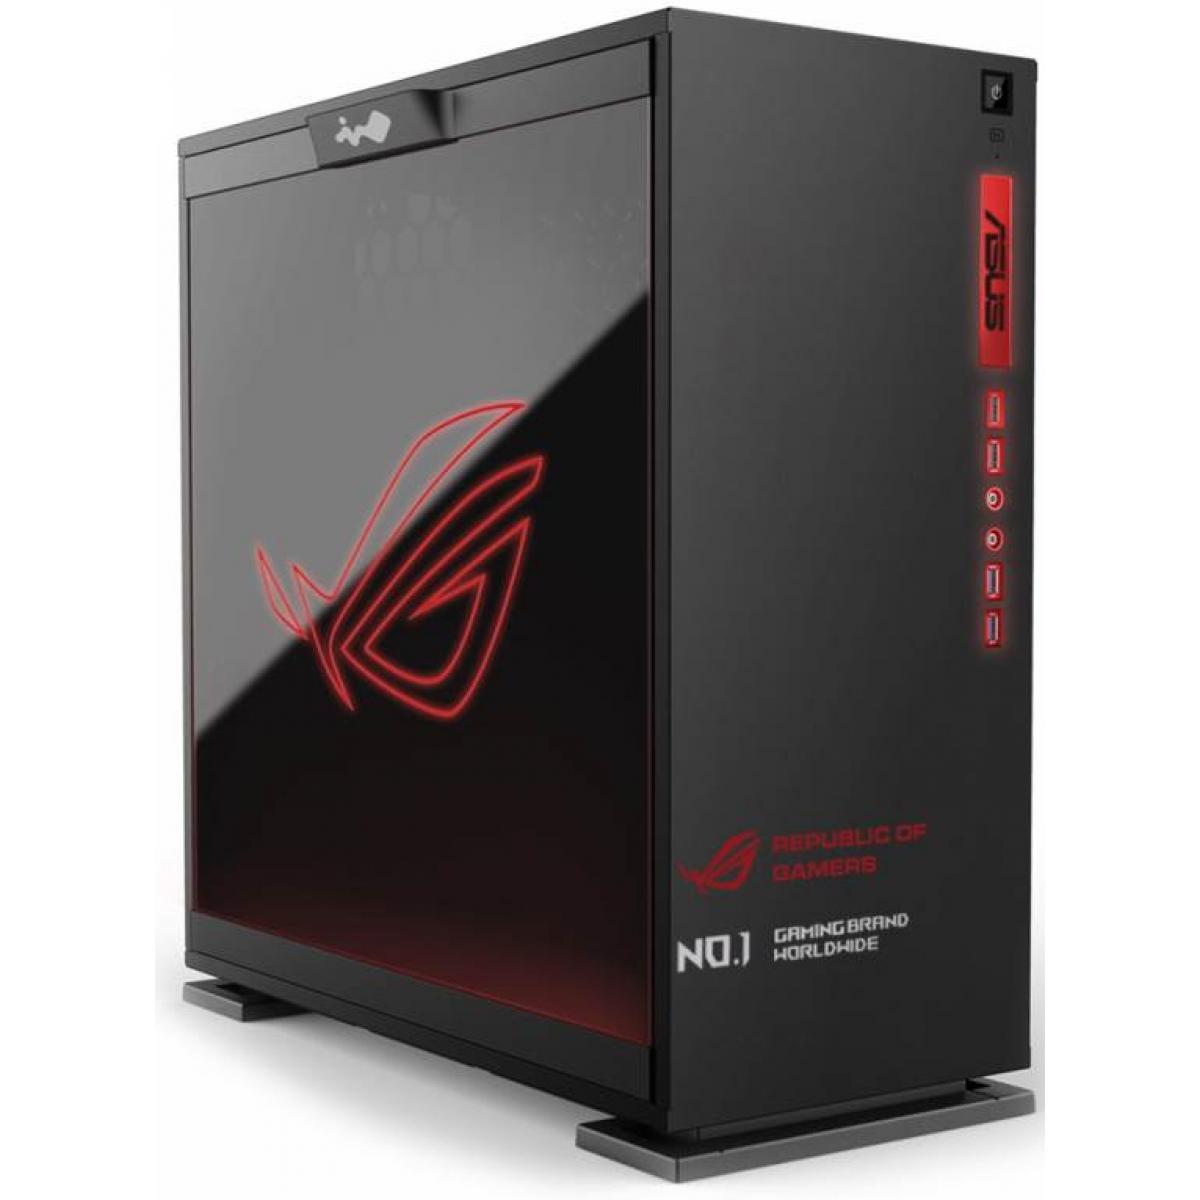 InWin 303 ASUS ROG Limited Edition Mid Tower Case